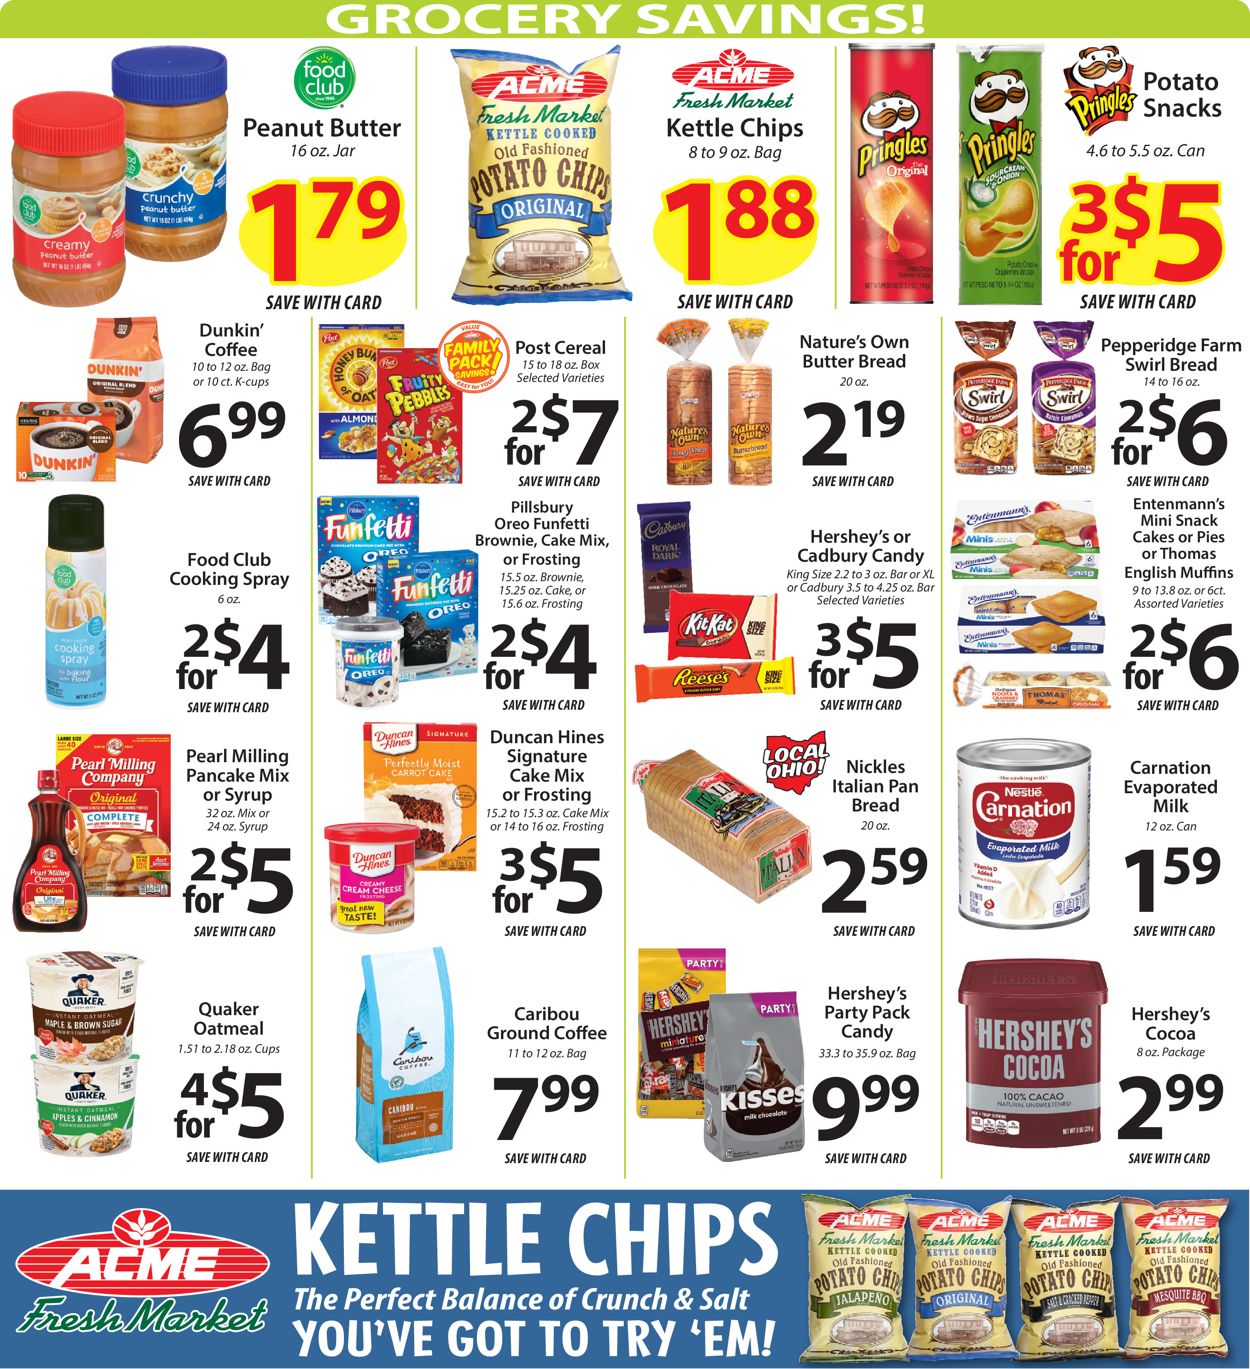 Acme Fresh Market Ad from 02/03/2022